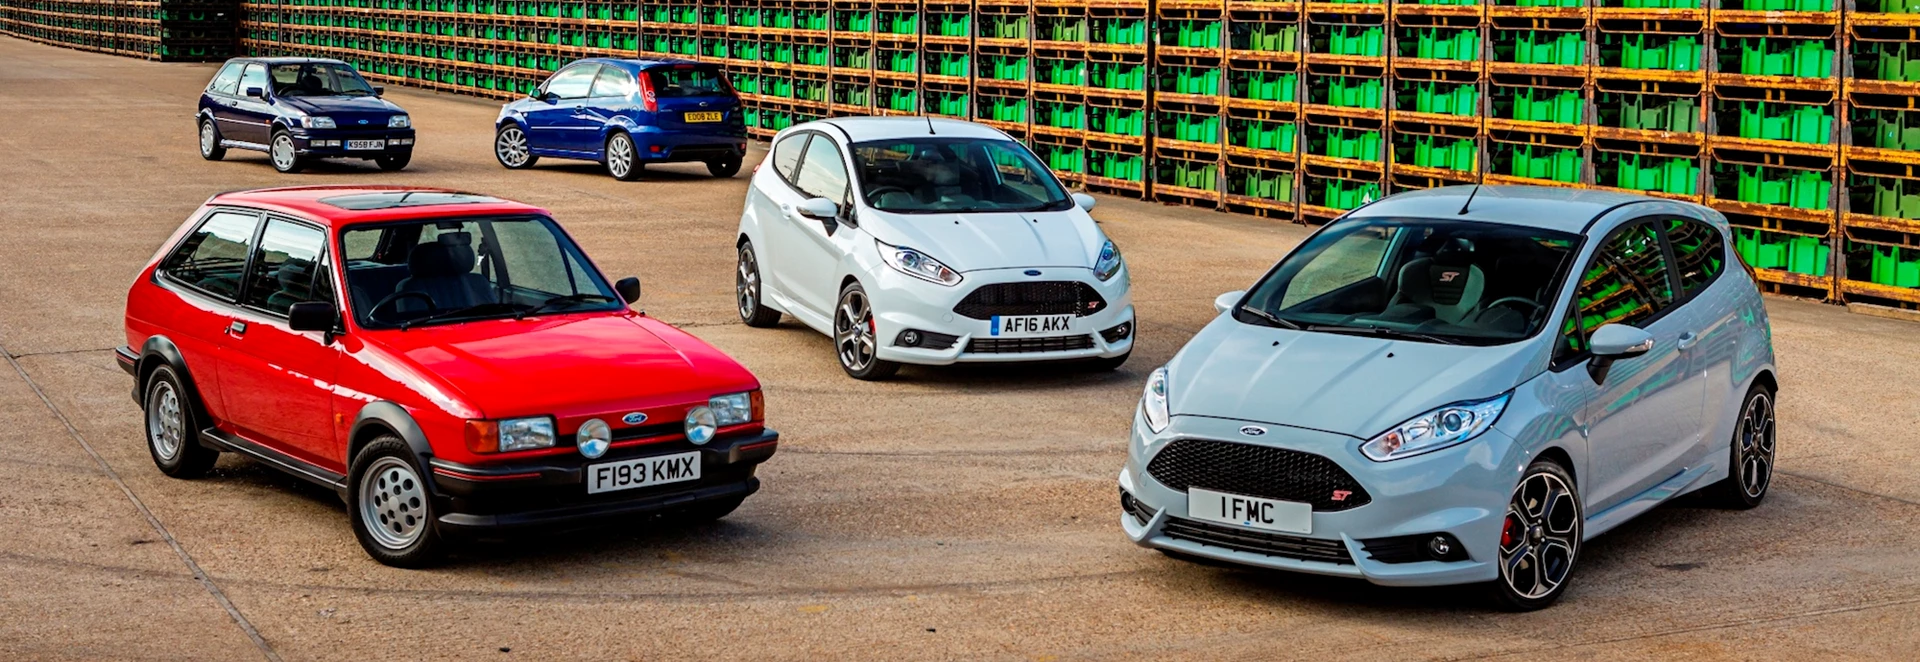 Ford Fiesta is the UK's best-selling car ever: And here’s why!